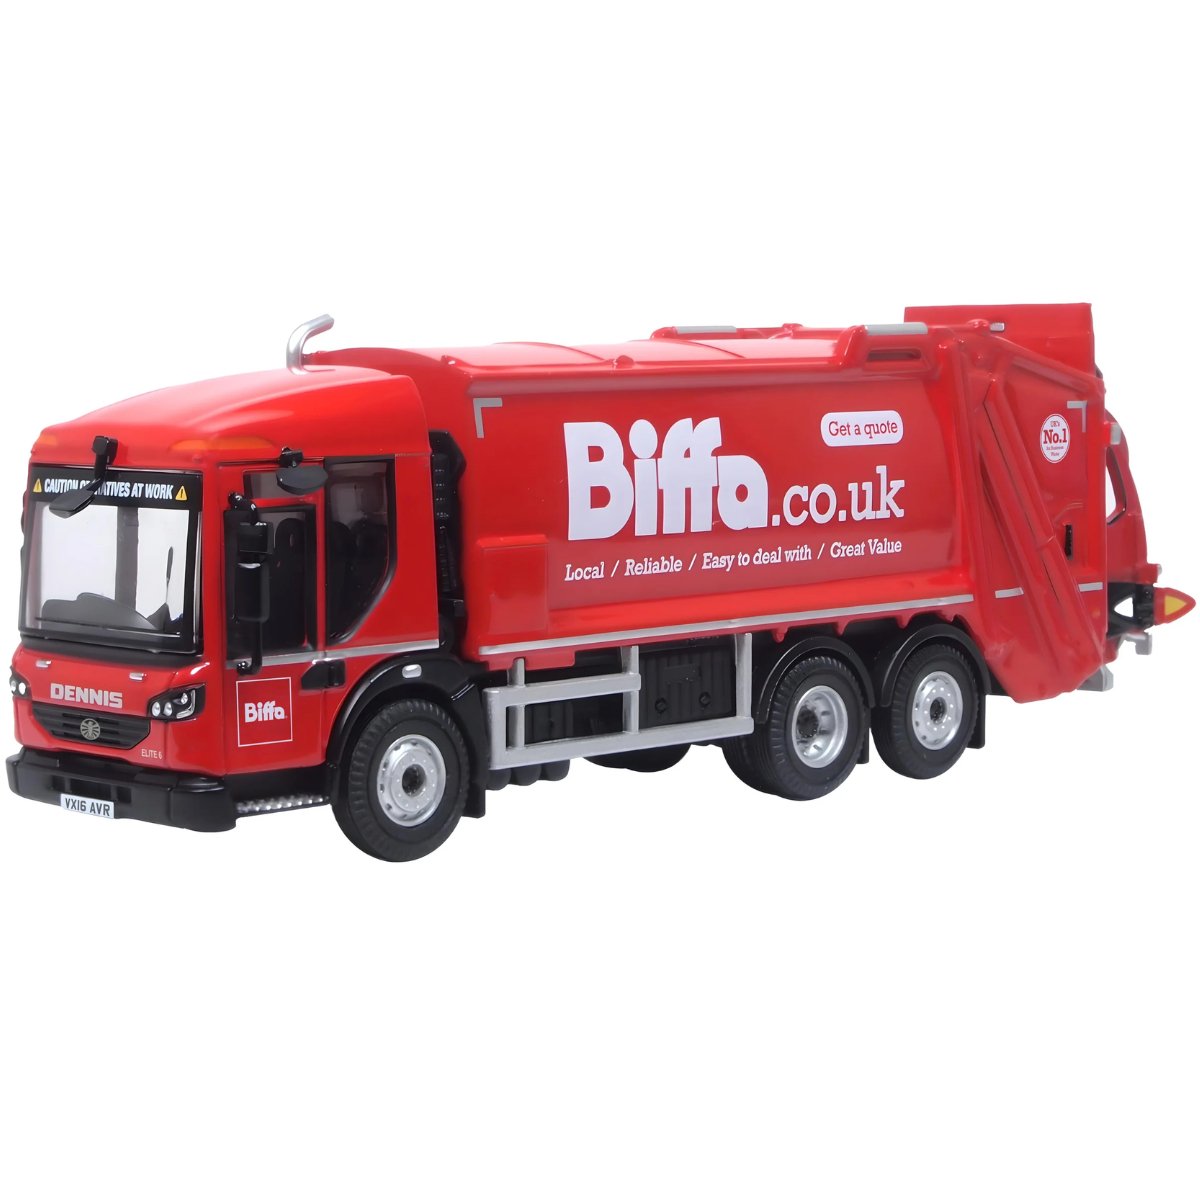 1:76 Scale Refuse Truck from Oxford Diecast. Livery Biffa